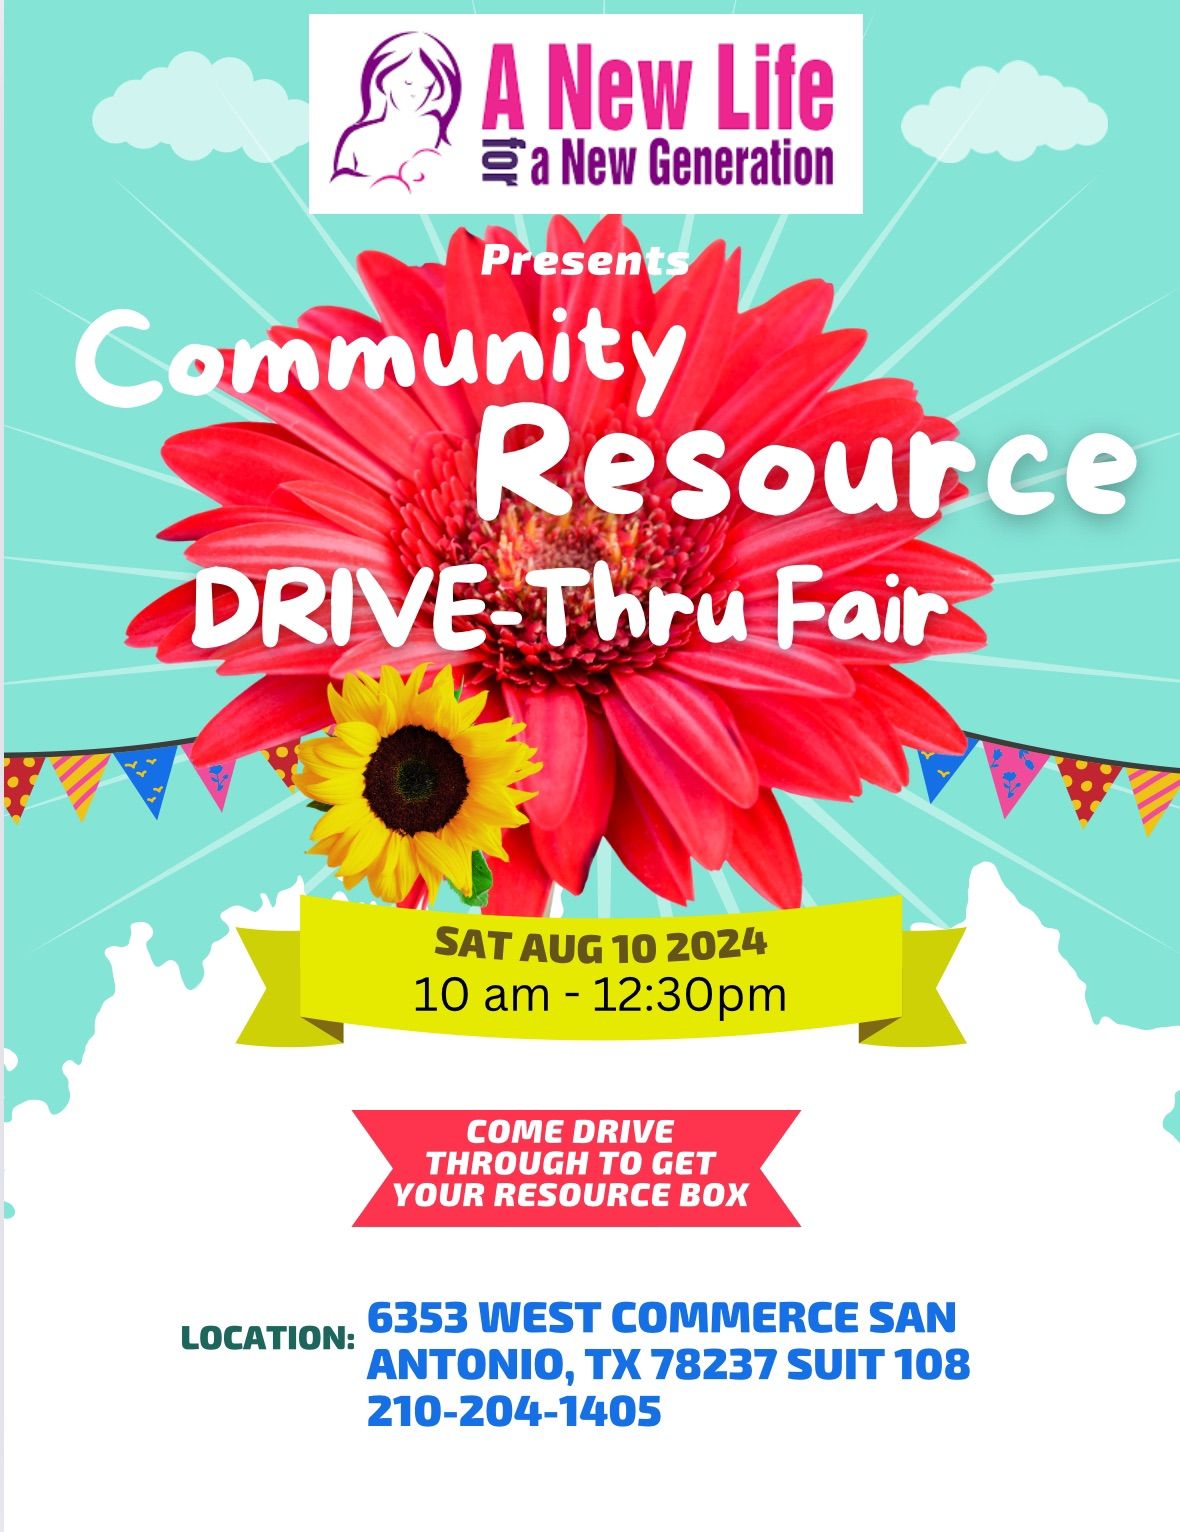 A New Life For A New Generation Community Resources Drive -Thru Fair